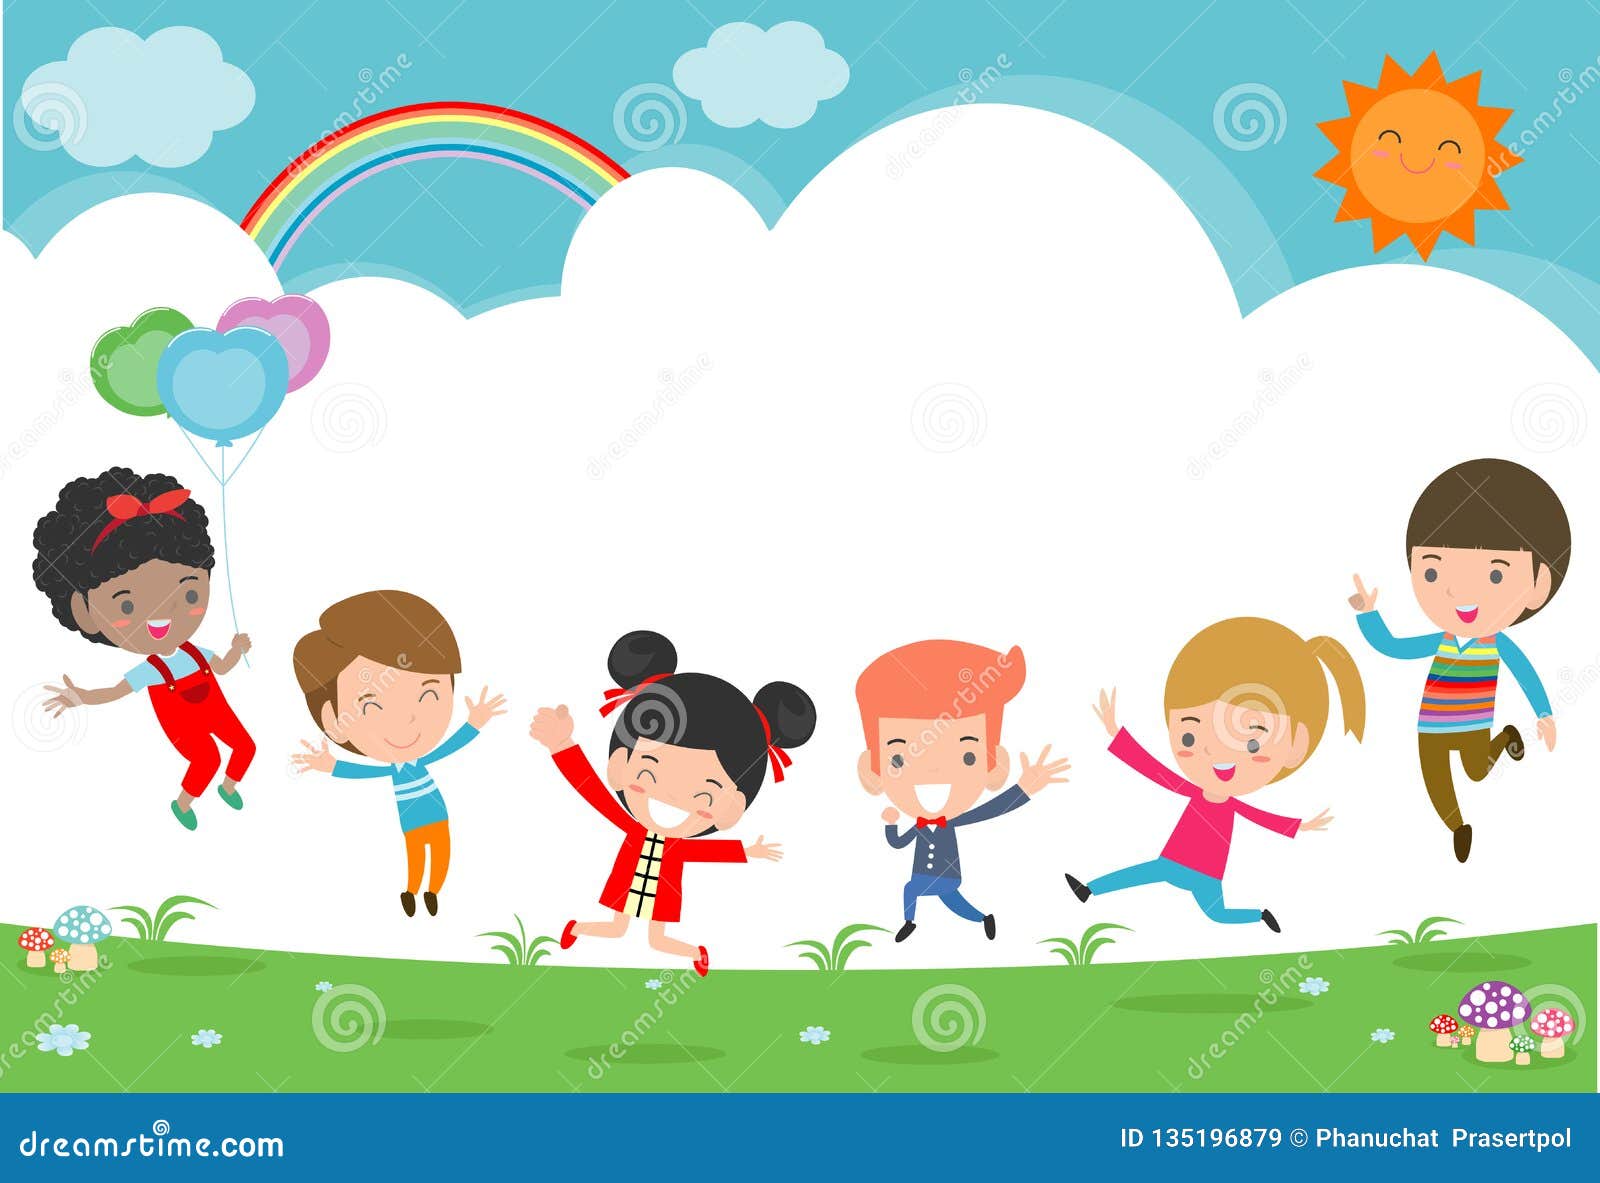 Kids Jumping on the Playground, Children Jump with Joy, Happy Cartoon Child  Playing on Background Stock Vector - Illustration of layout, child:  135196879